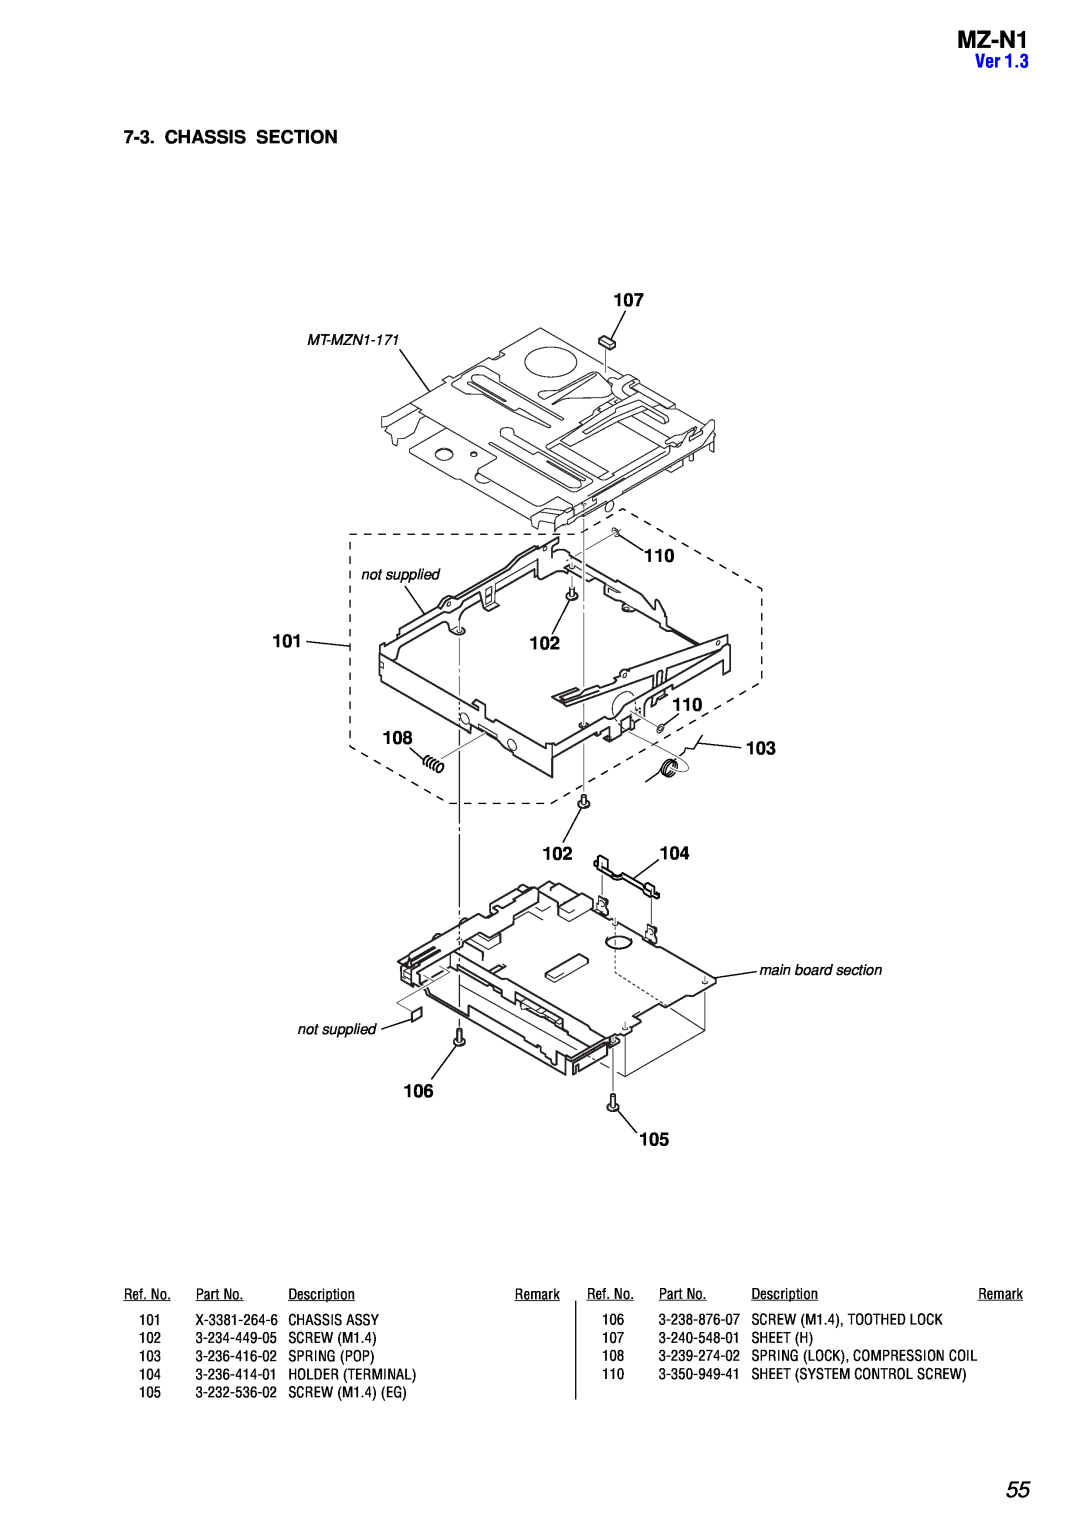 Sony MZ-N1 service manual Chassis Section, 101, 107 110 102 